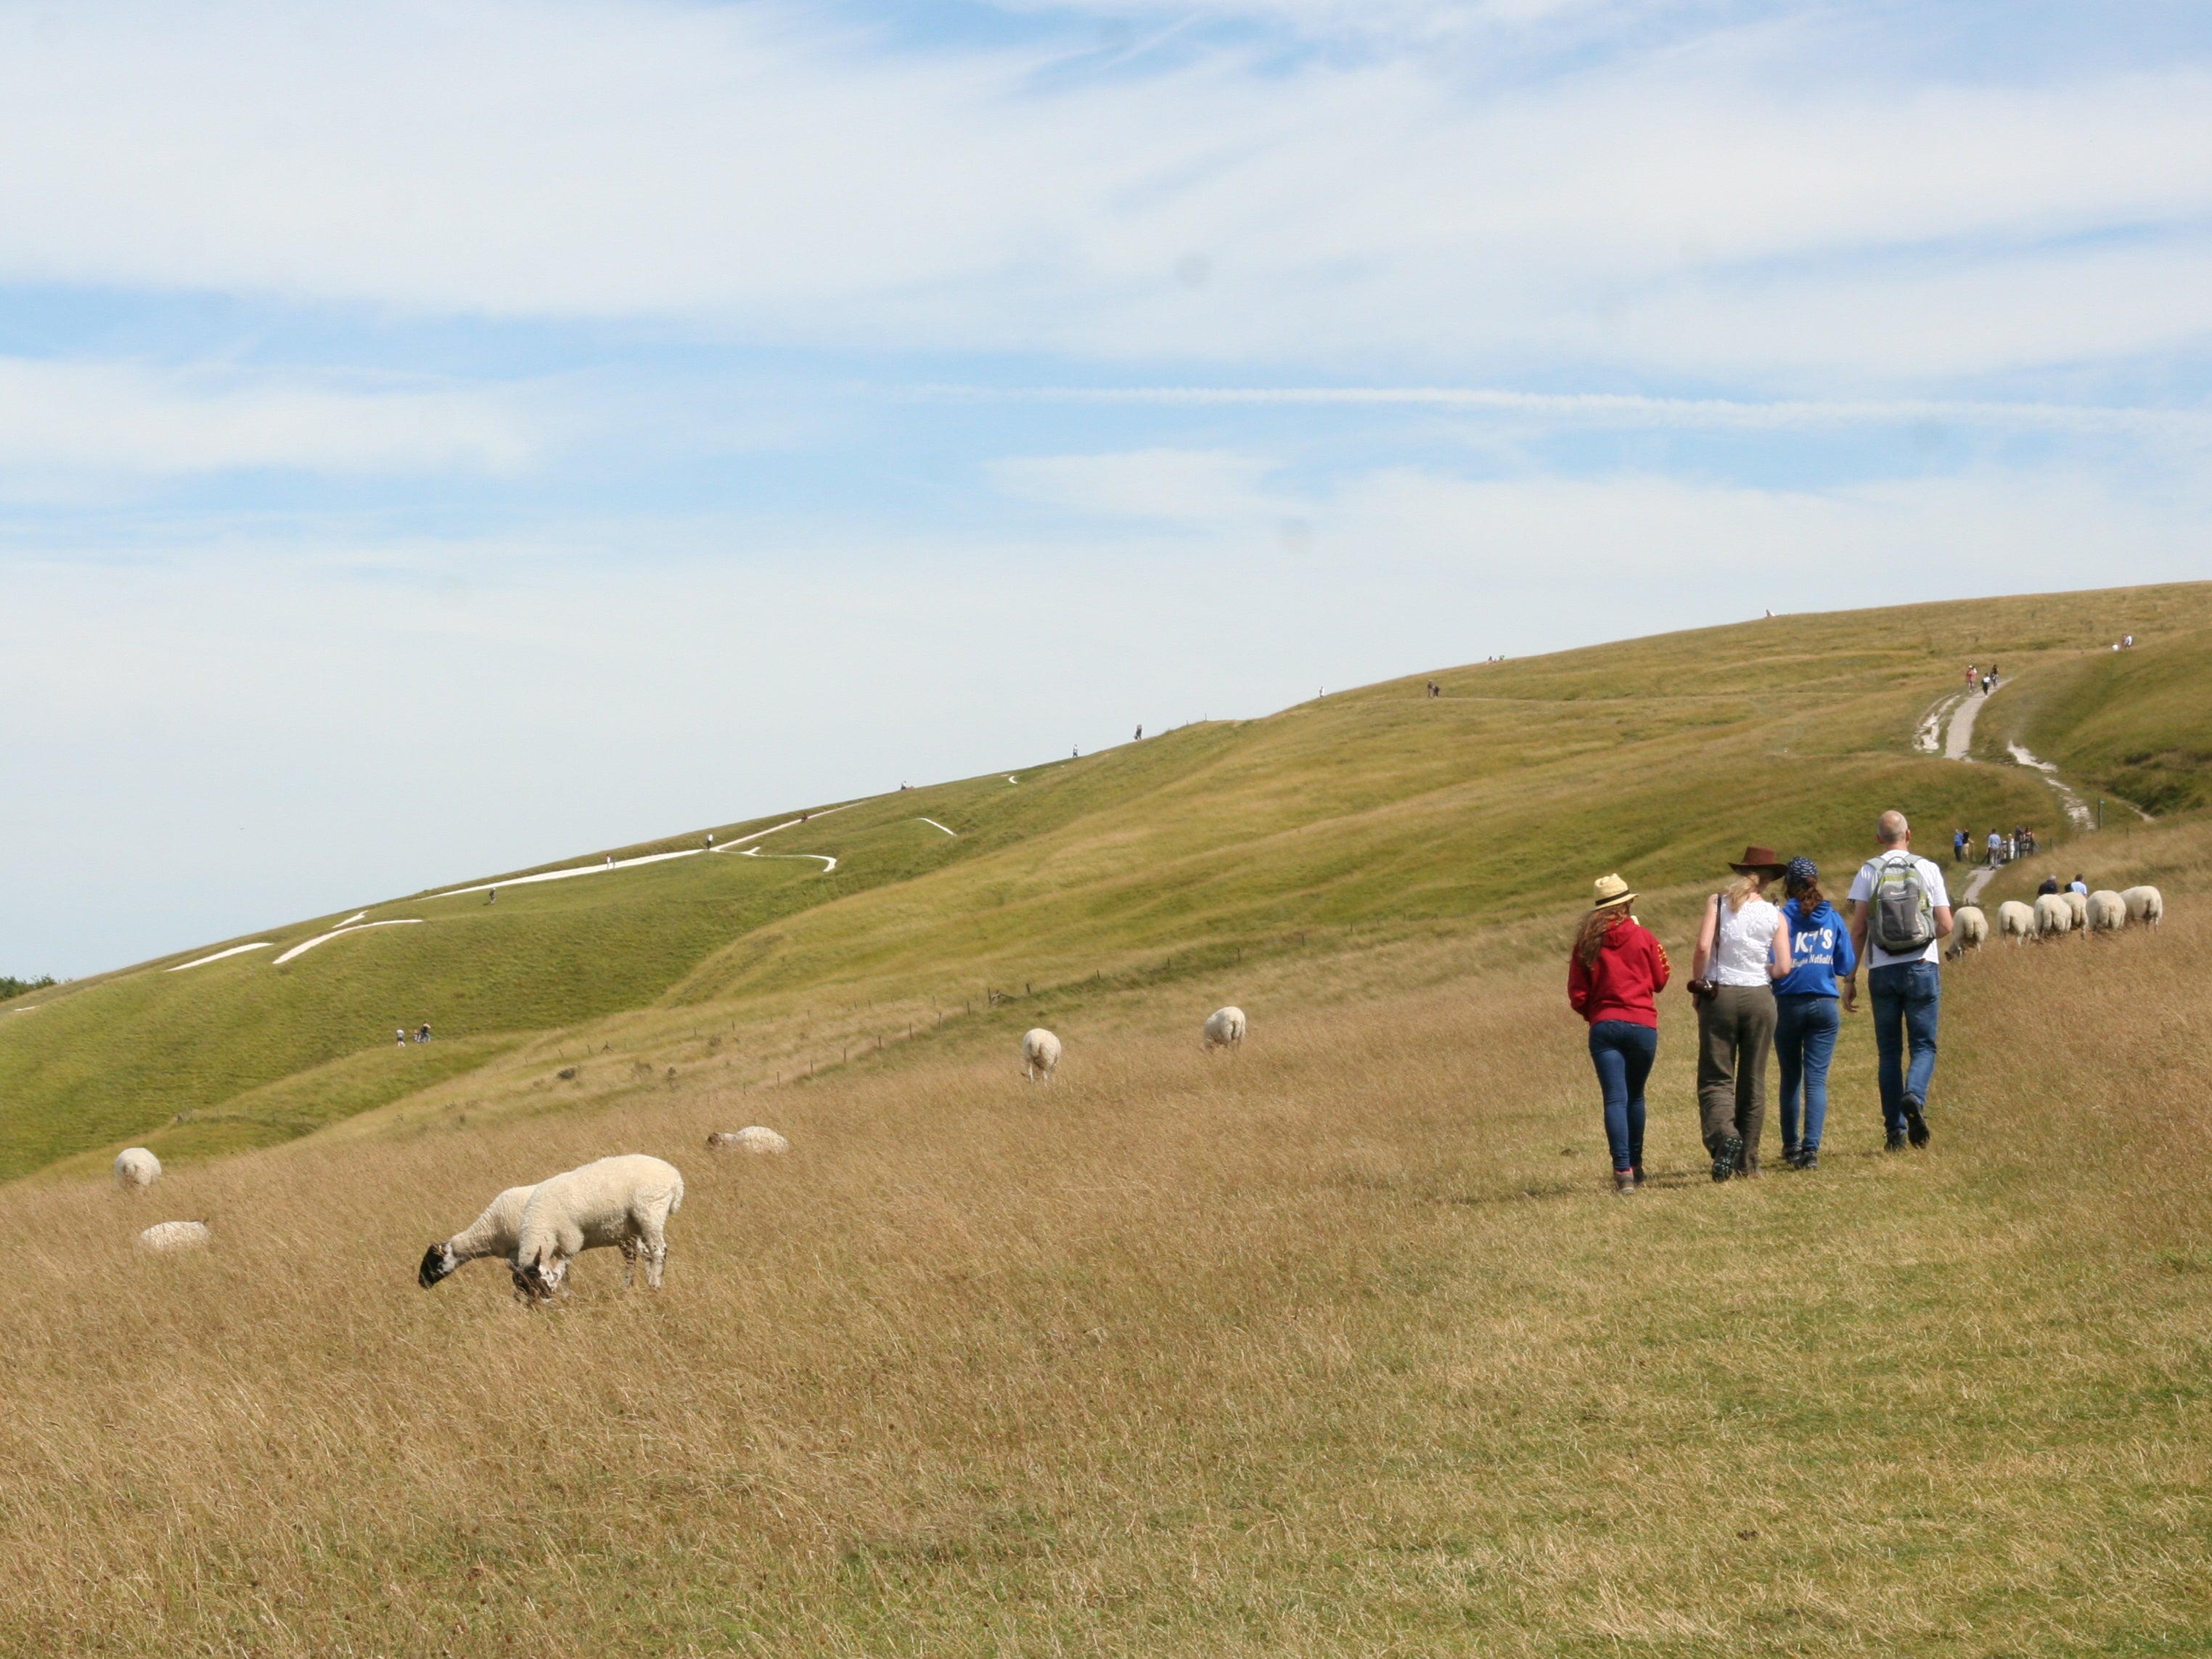 Sheep and walkers on the Ridgeway, beside the Uffington White Horse